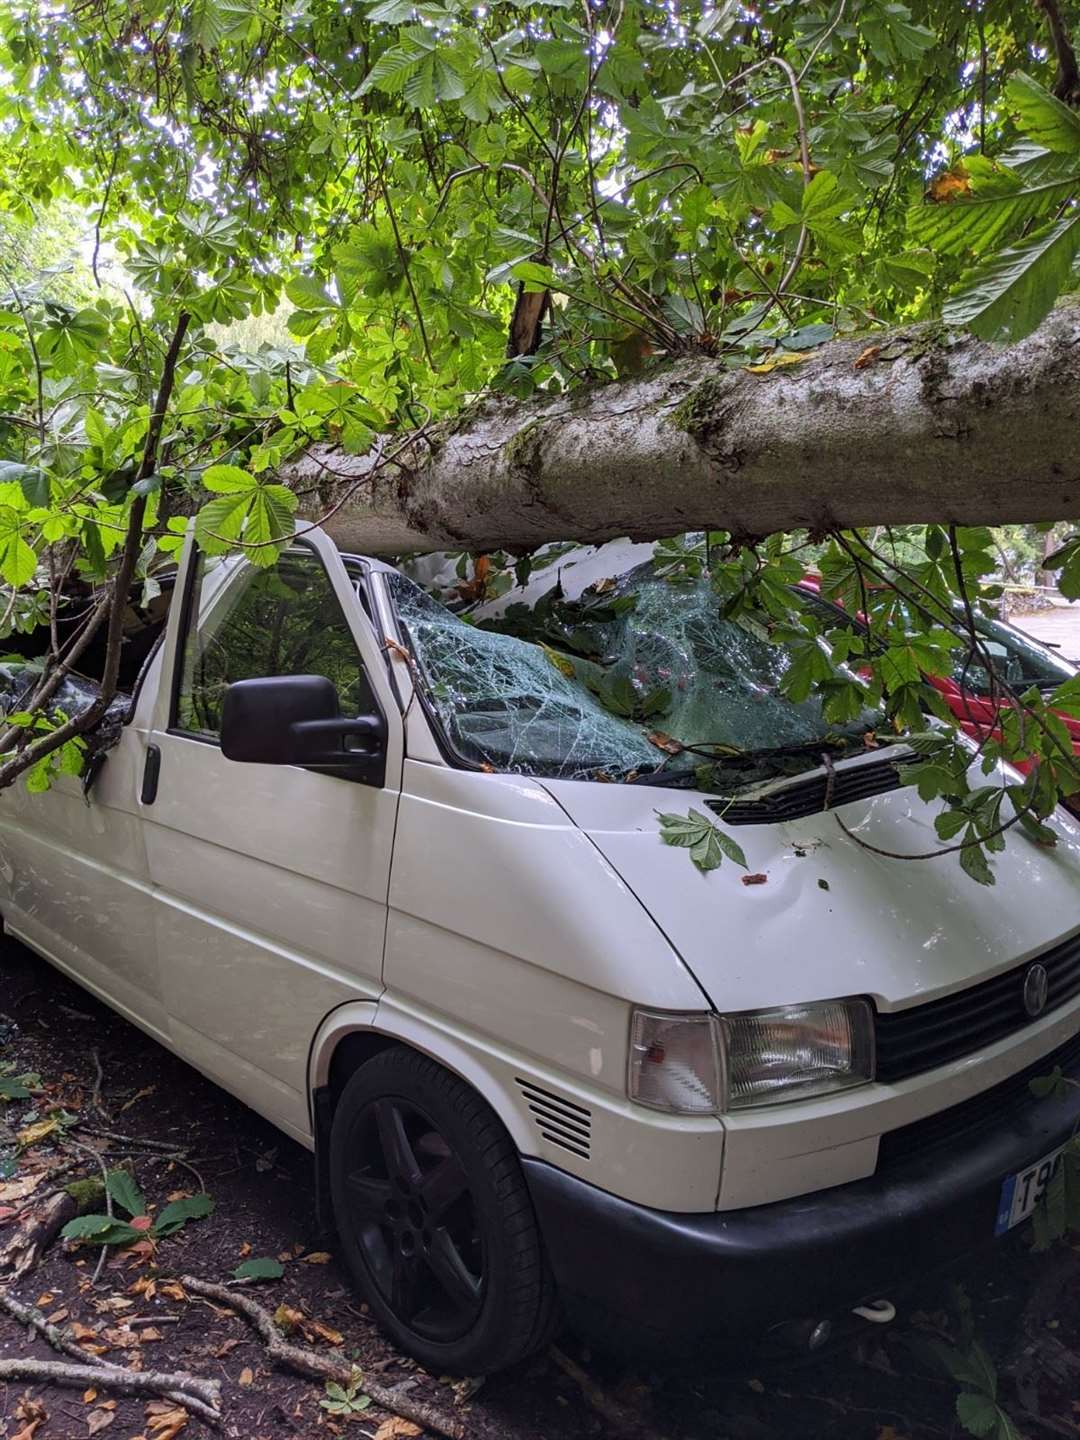 The Volkswagen campervan was extensively damaged after a heavy branch from a tree fell on it.